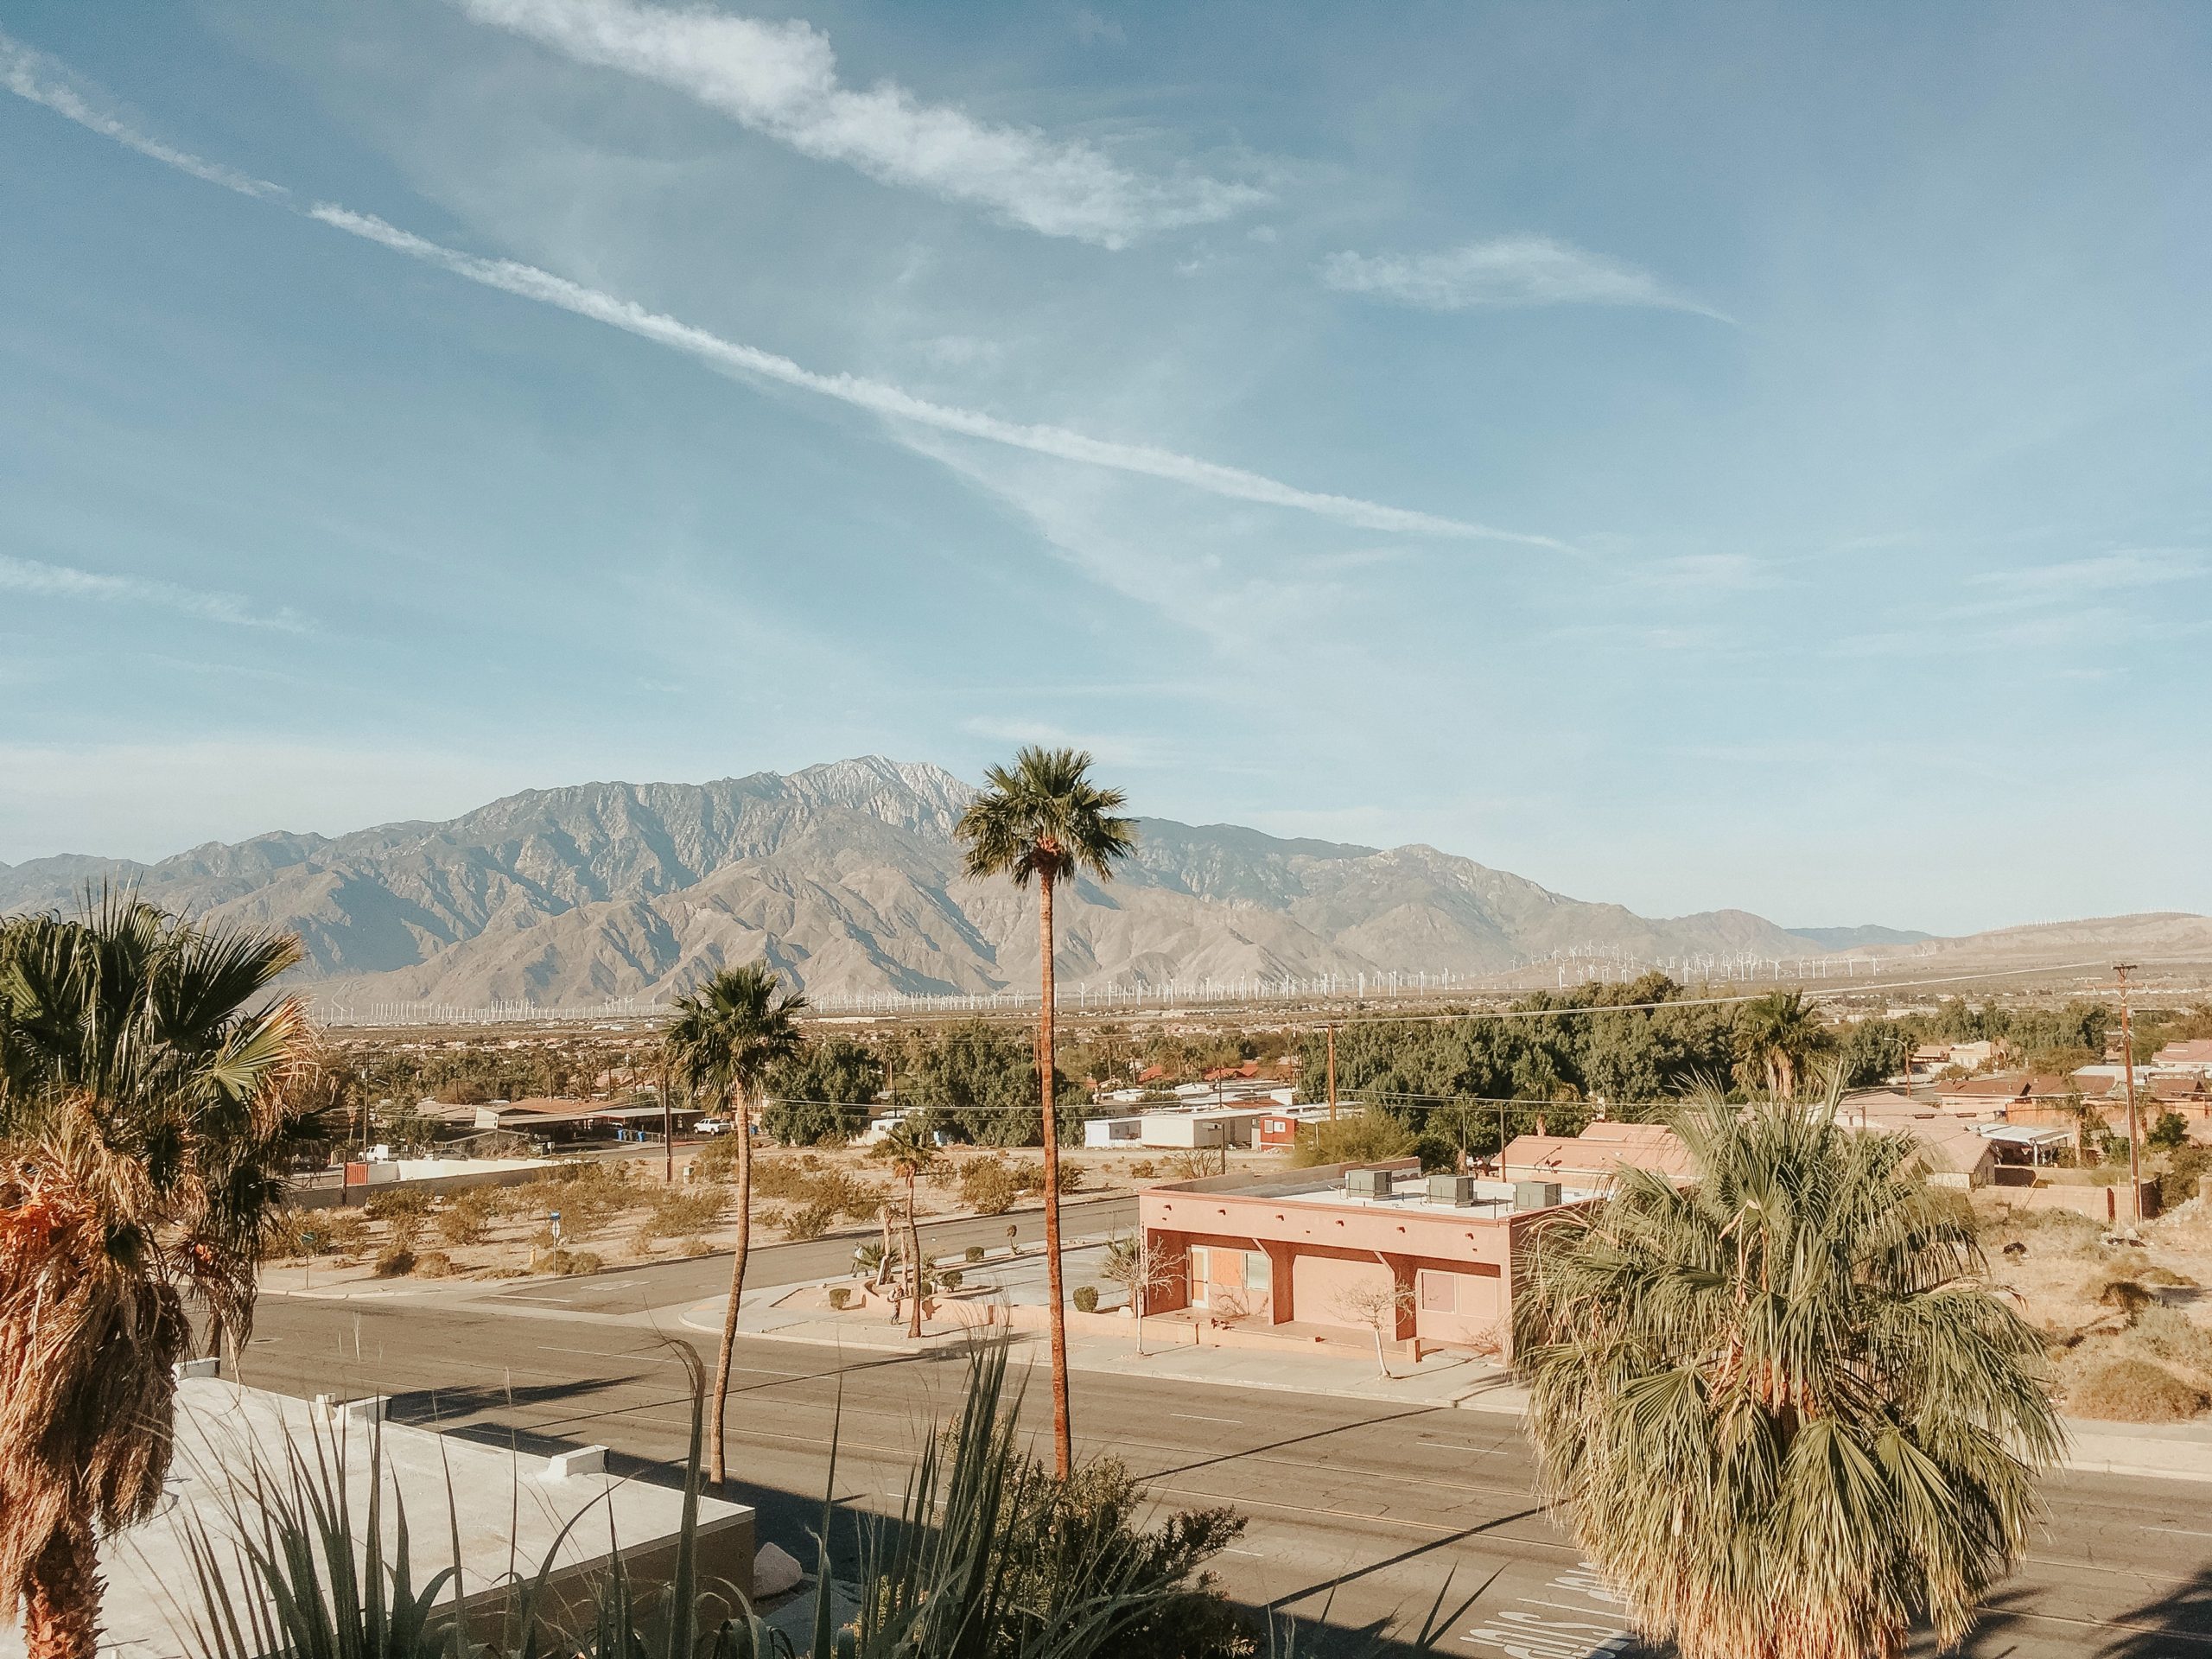 A view of a neighborhood in Palm Springs, California area